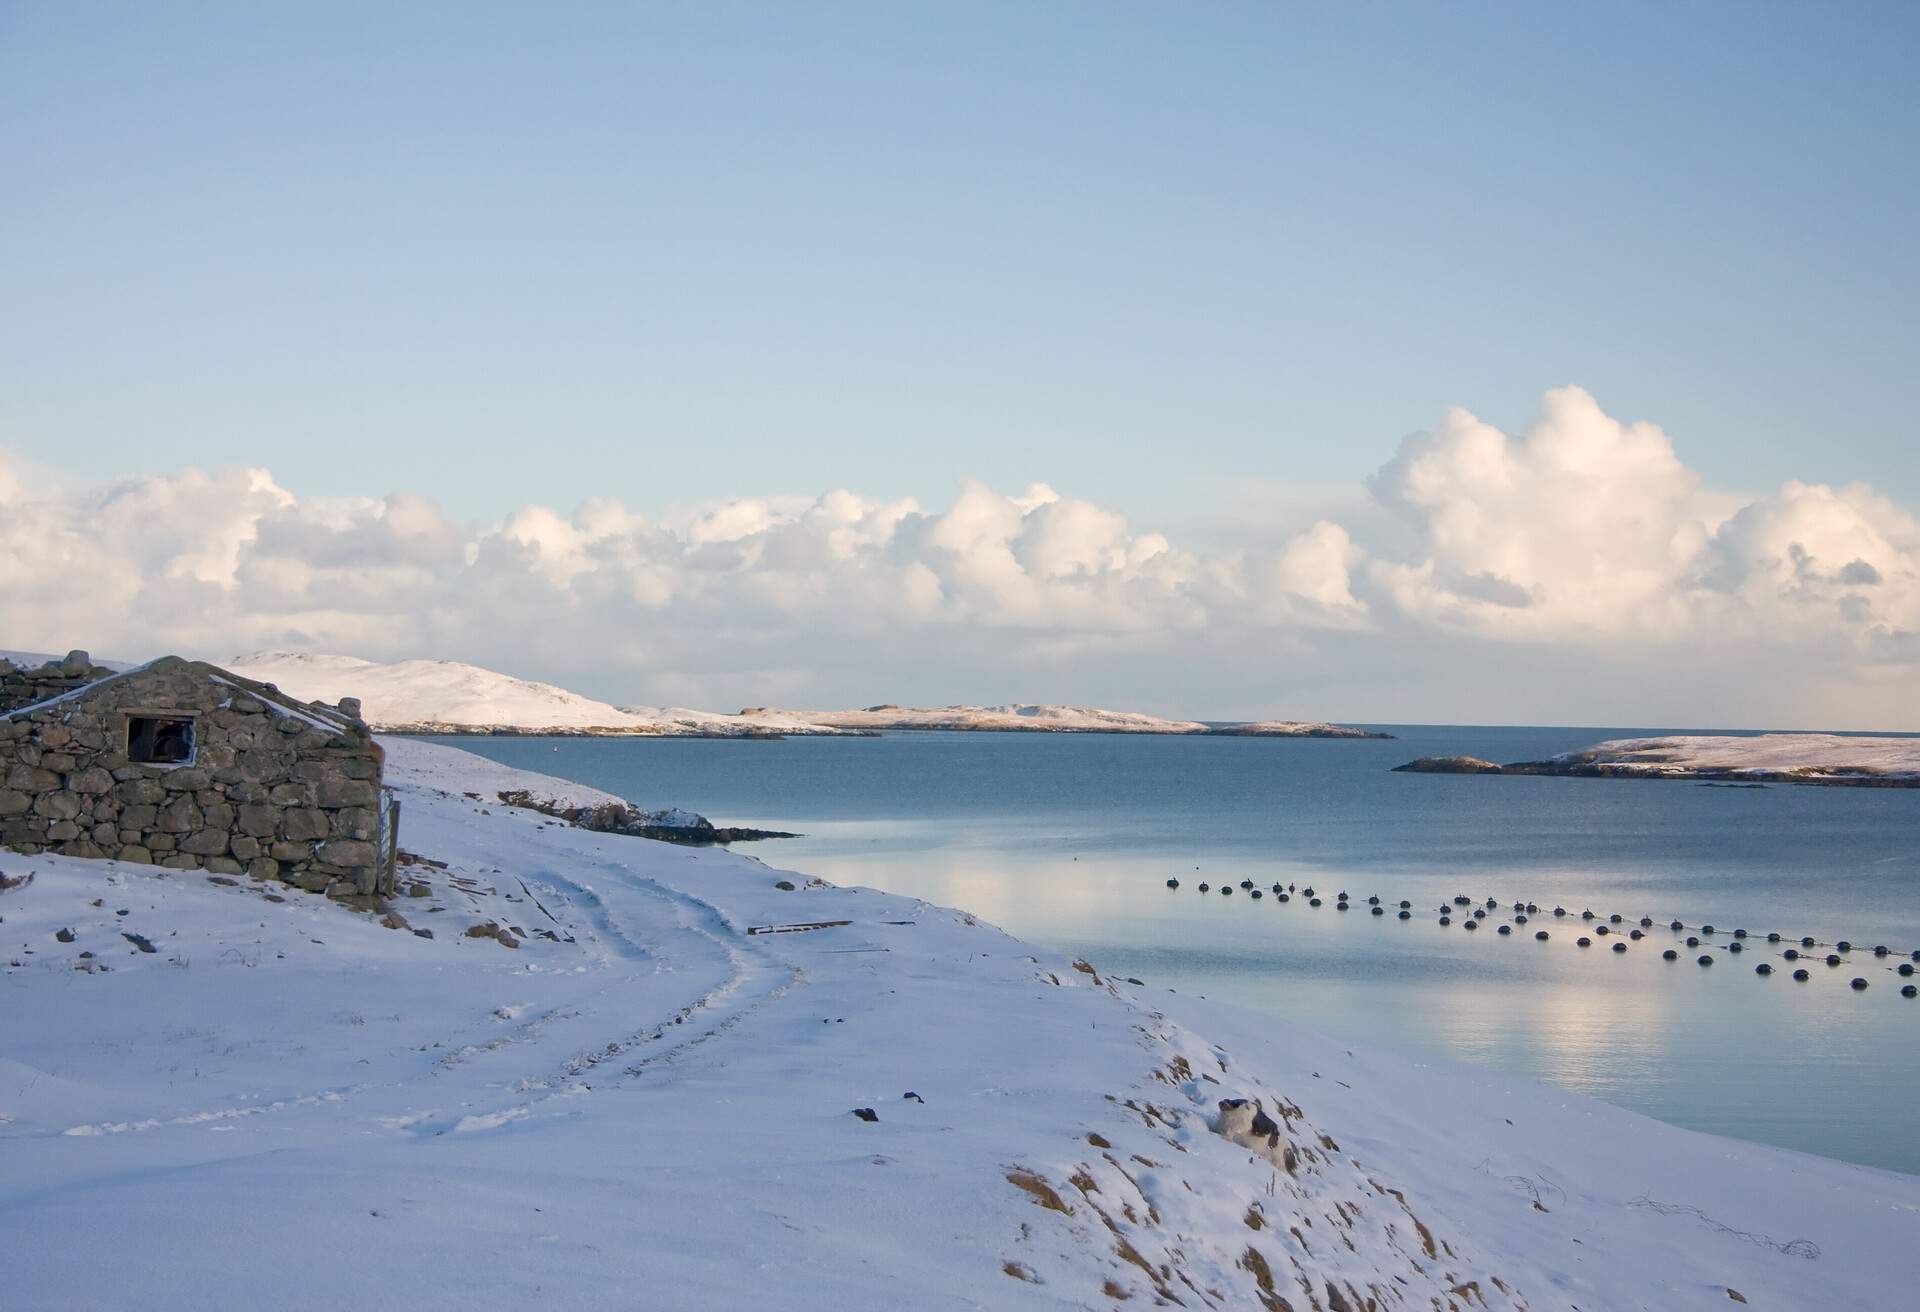 A croft house on a shore covered in snow.